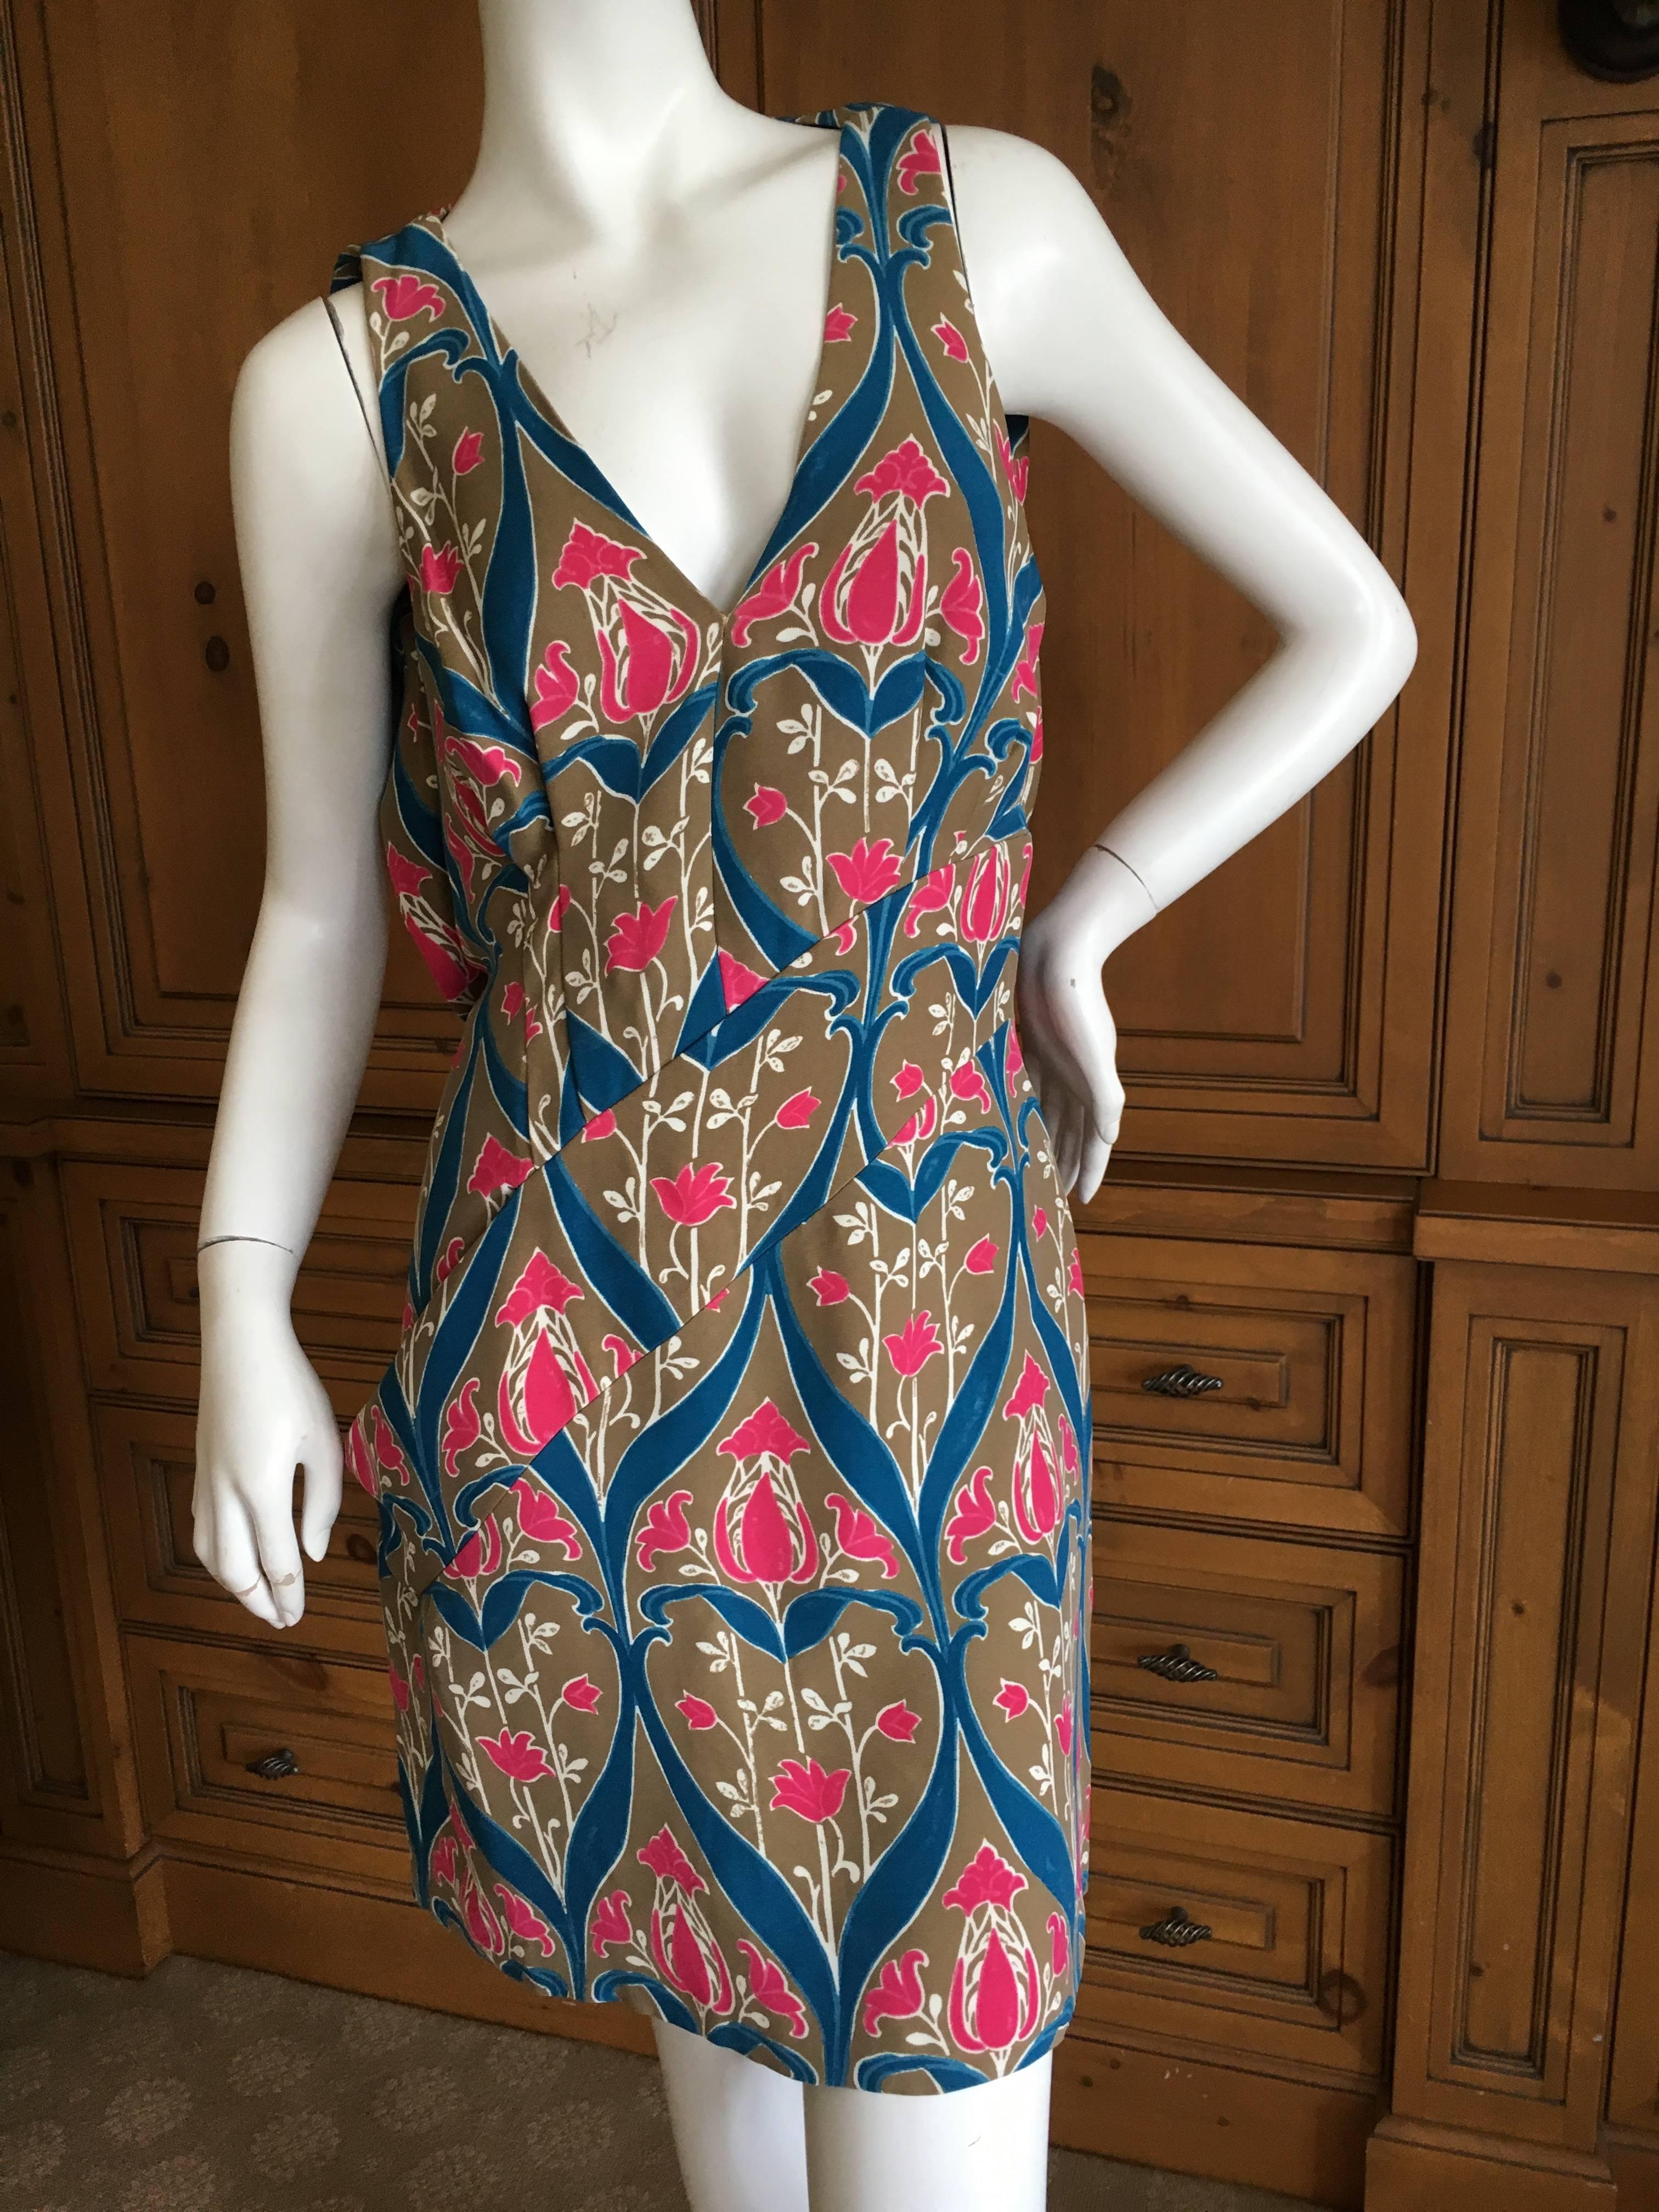 Prada Tulip Print Mini Dress with Keyhole Back Size 44 In Excellent Condition For Sale In Cloverdale, CA